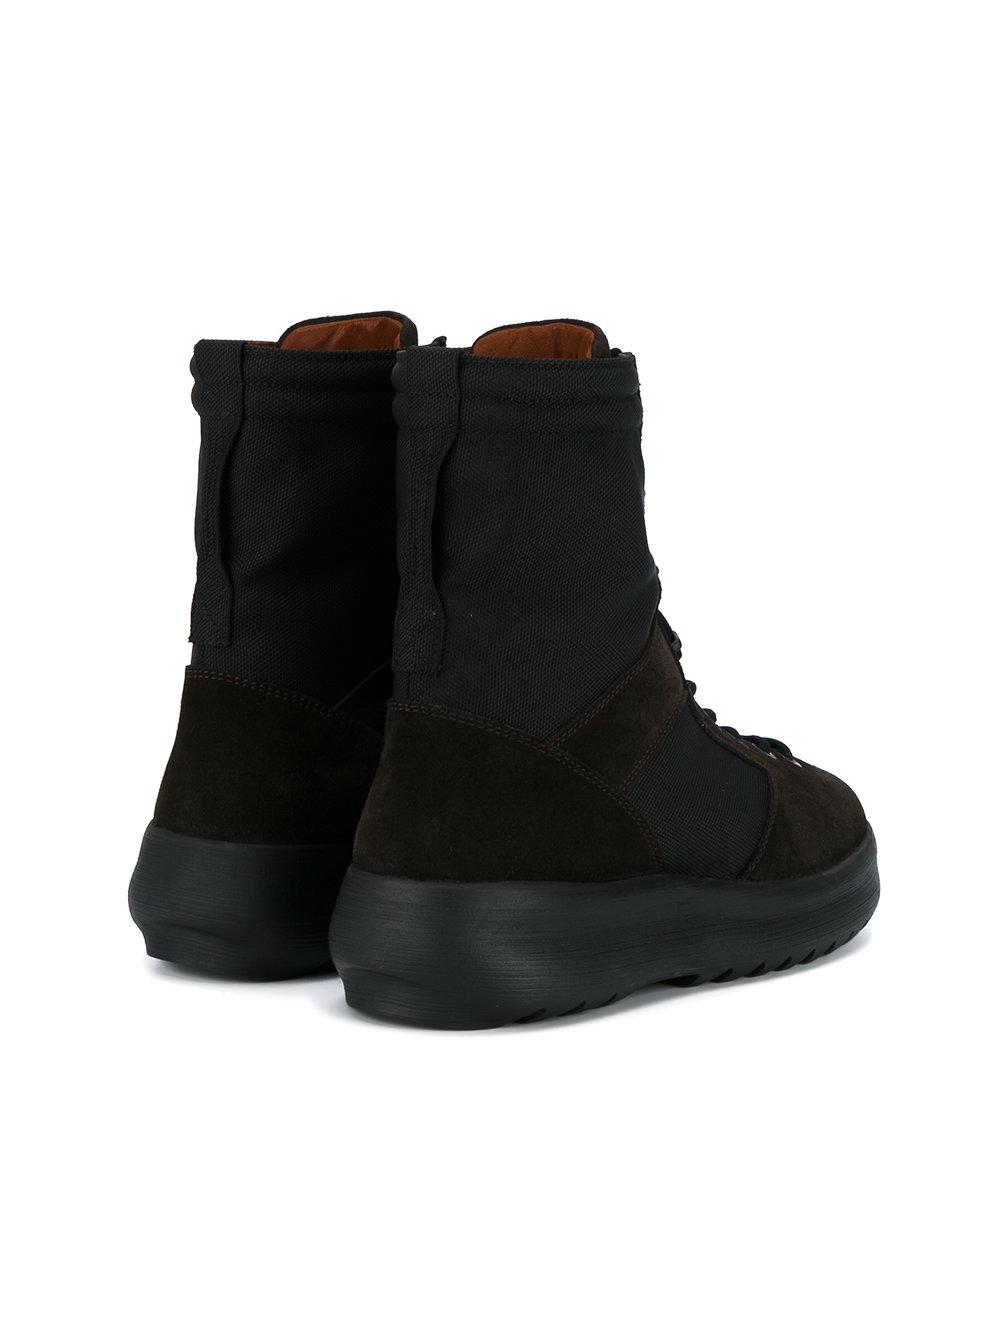 yeezy boots military